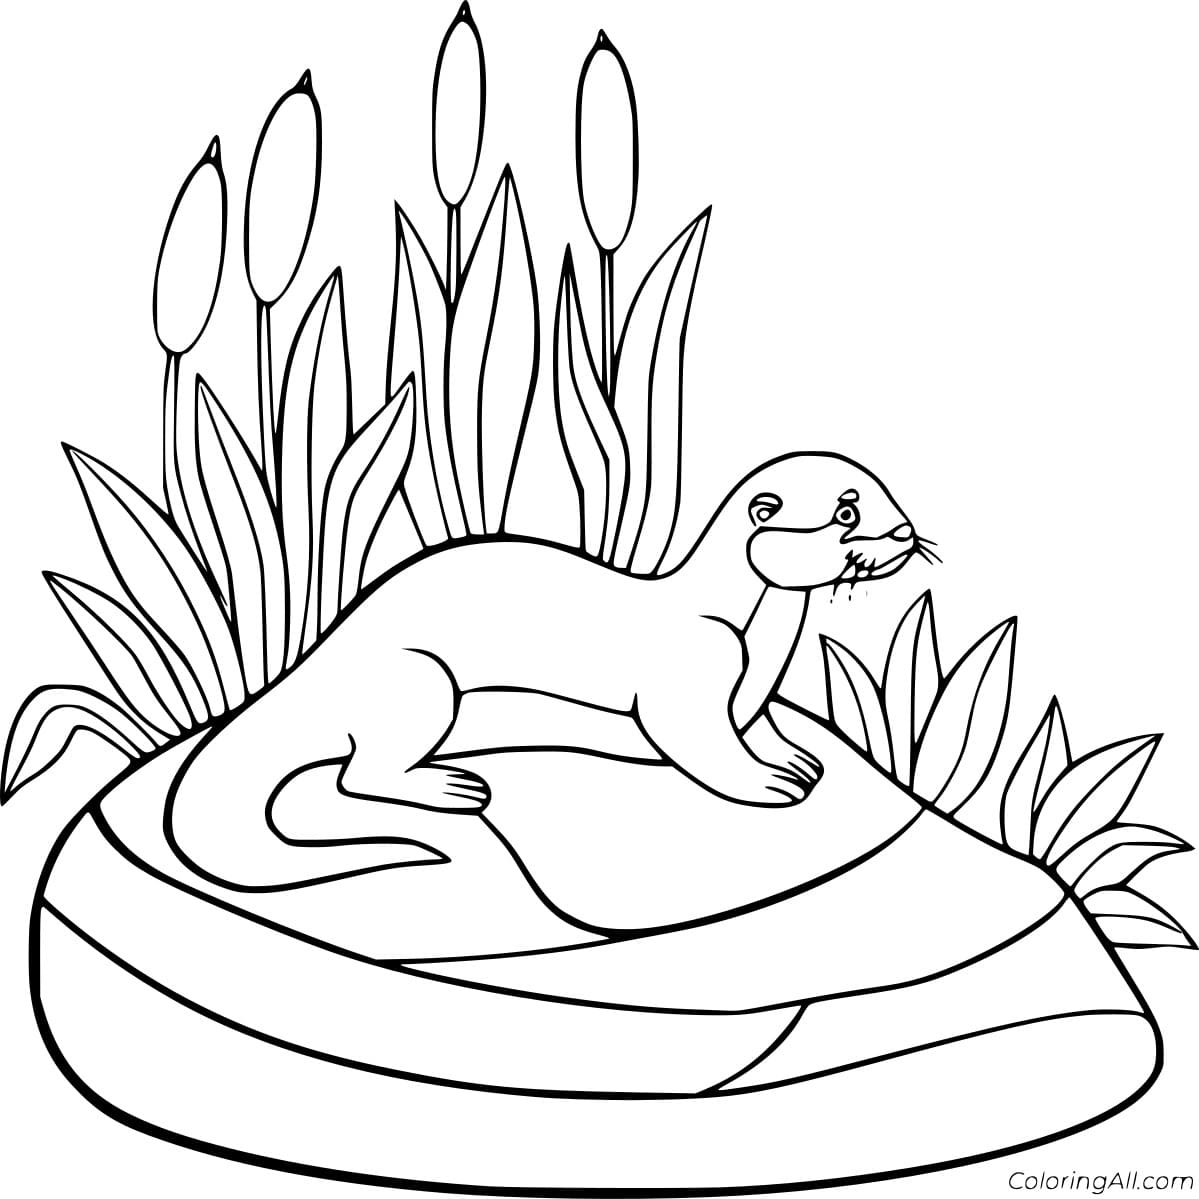 Printable Cartoon Otter On the Rock Free Coloring Page